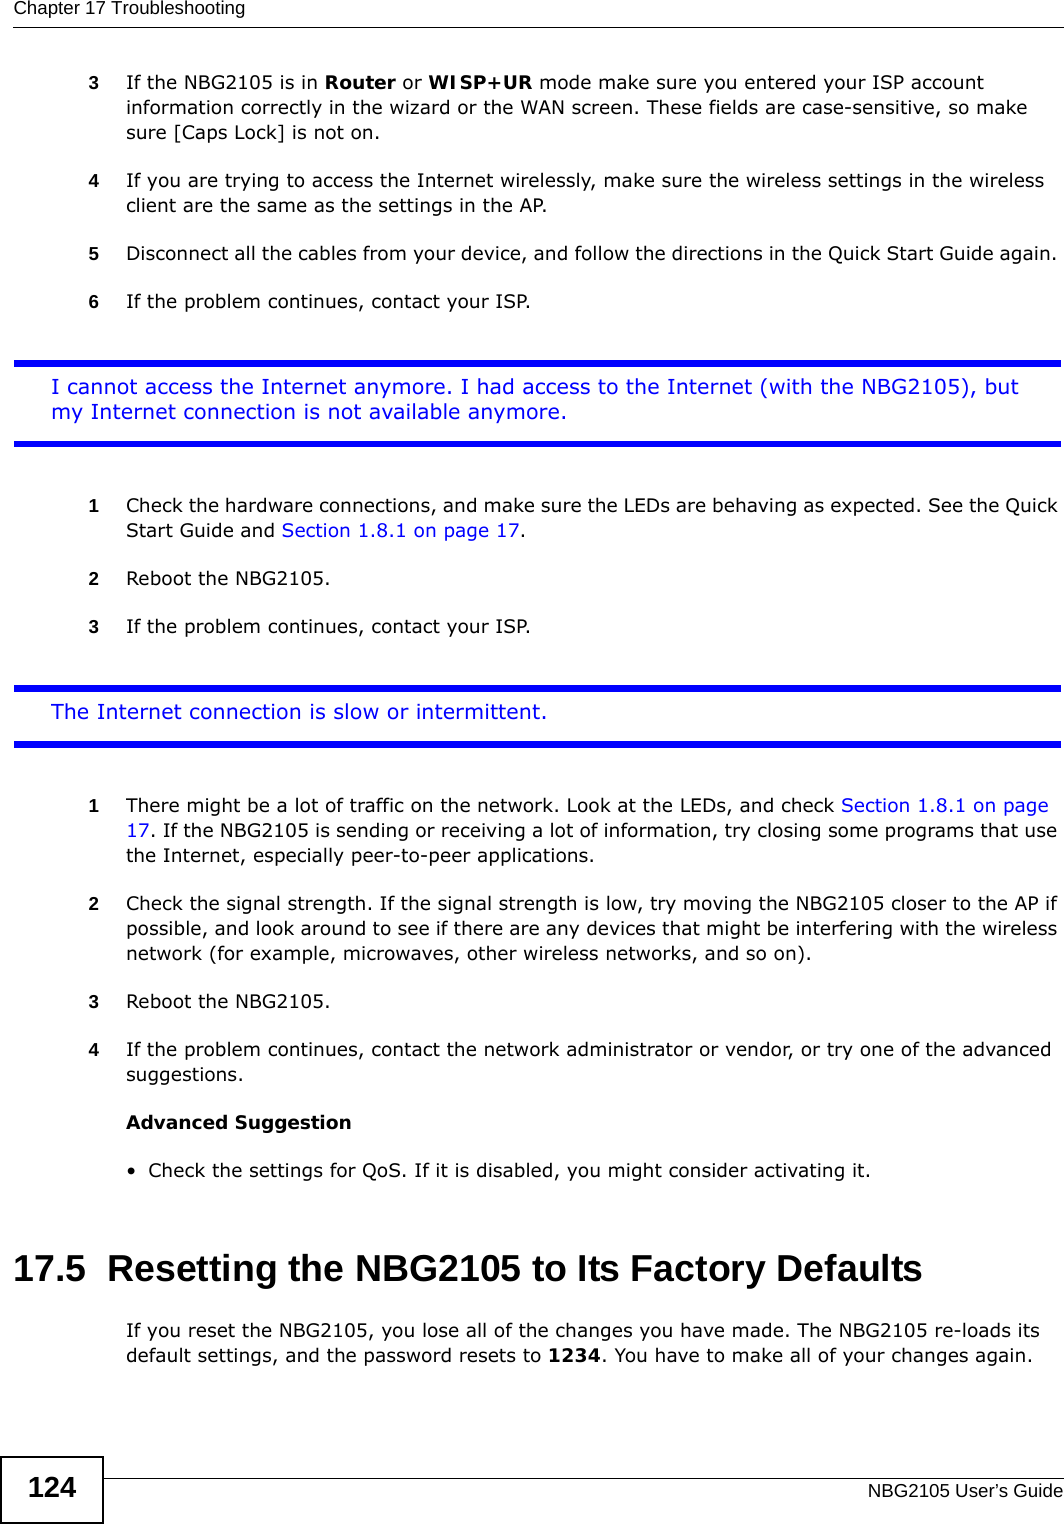 Chapter 17 TroubleshootingNBG2105 User’s Guide1243If the NBG2105 is in Router or WISP+UR mode make sure you entered your ISP account information correctly in the wizard or the WAN screen. These fields are case-sensitive, so make sure [Caps Lock] is not on.4If you are trying to access the Internet wirelessly, make sure the wireless settings in the wireless client are the same as the settings in the AP.5Disconnect all the cables from your device, and follow the directions in the Quick Start Guide again. 6If the problem continues, contact your ISP.I cannot access the Internet anymore. I had access to the Internet (with the NBG2105), but my Internet connection is not available anymore.1Check the hardware connections, and make sure the LEDs are behaving as expected. See the Quick Start Guide and Section 1.8.1 on page 17. 2Reboot the NBG2105.3If the problem continues, contact your ISP. The Internet connection is slow or intermittent.1There might be a lot of traffic on the network. Look at the LEDs, and check Section 1.8.1 on page 17. If the NBG2105 is sending or receiving a lot of information, try closing some programs that use the Internet, especially peer-to-peer applications.2Check the signal strength. If the signal strength is low, try moving the NBG2105 closer to the AP if possible, and look around to see if there are any devices that might be interfering with the wireless network (for example, microwaves, other wireless networks, and so on).3Reboot the NBG2105.4If the problem continues, contact the network administrator or vendor, or try one of the advanced suggestions.Advanced Suggestion• Check the settings for QoS. If it is disabled, you might consider activating it.17.5  Resetting the NBG2105 to Its Factory Defaults If you reset the NBG2105, you lose all of the changes you have made. The NBG2105 re-loads its default settings, and the password resets to 1234. You have to make all of your changes again.